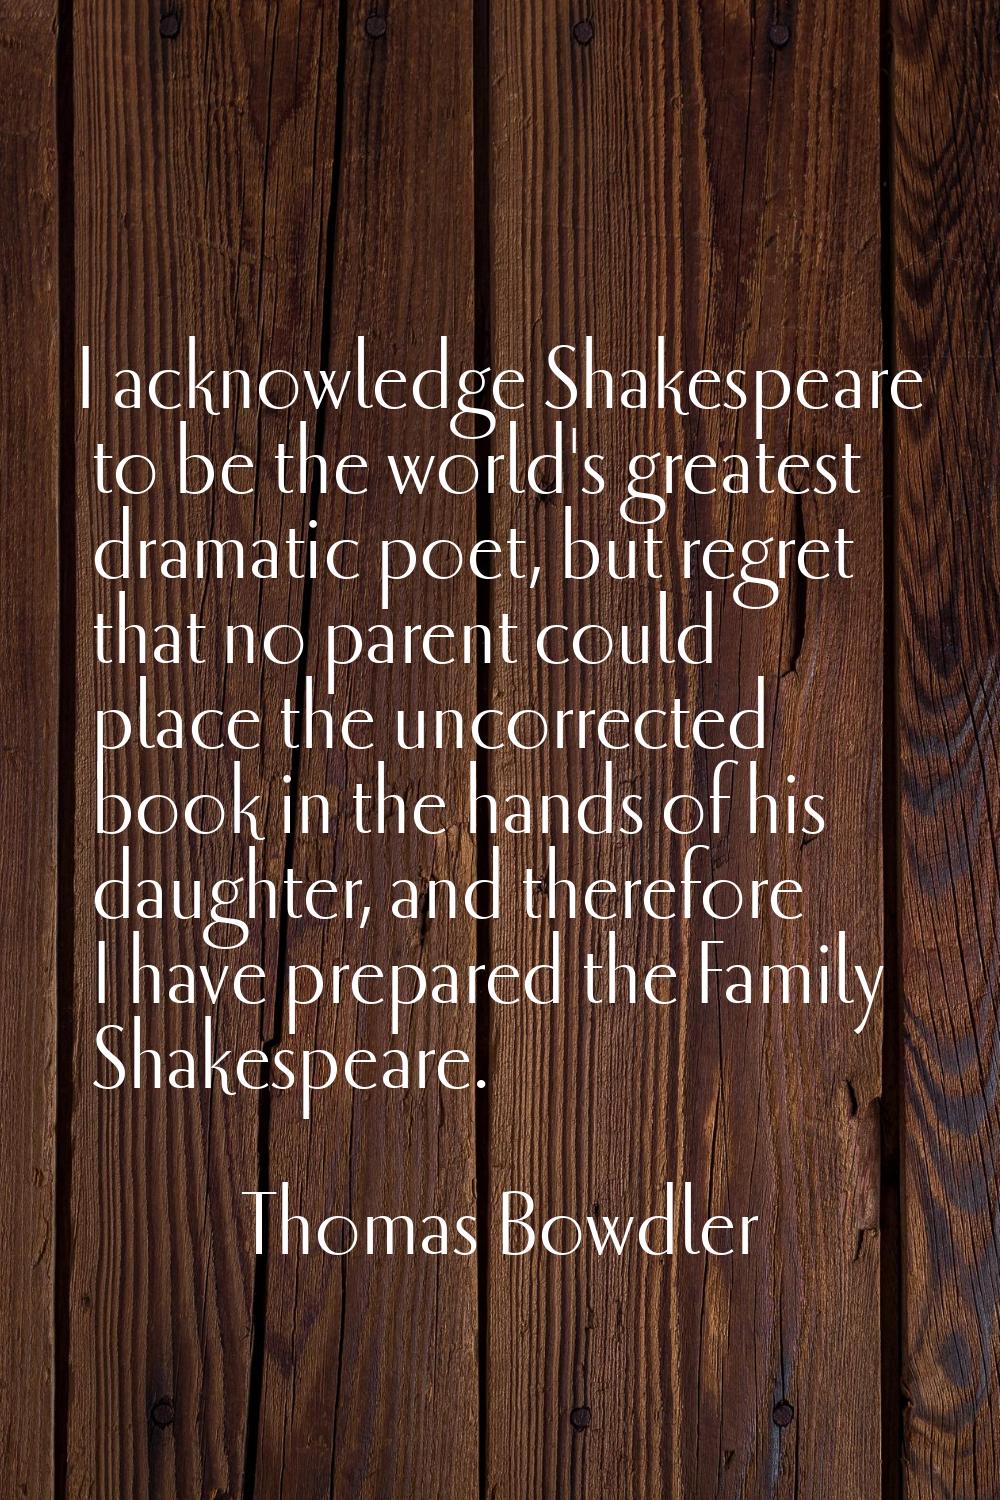 I acknowledge Shakespeare to be the world's greatest dramatic poet, but regret that no parent could